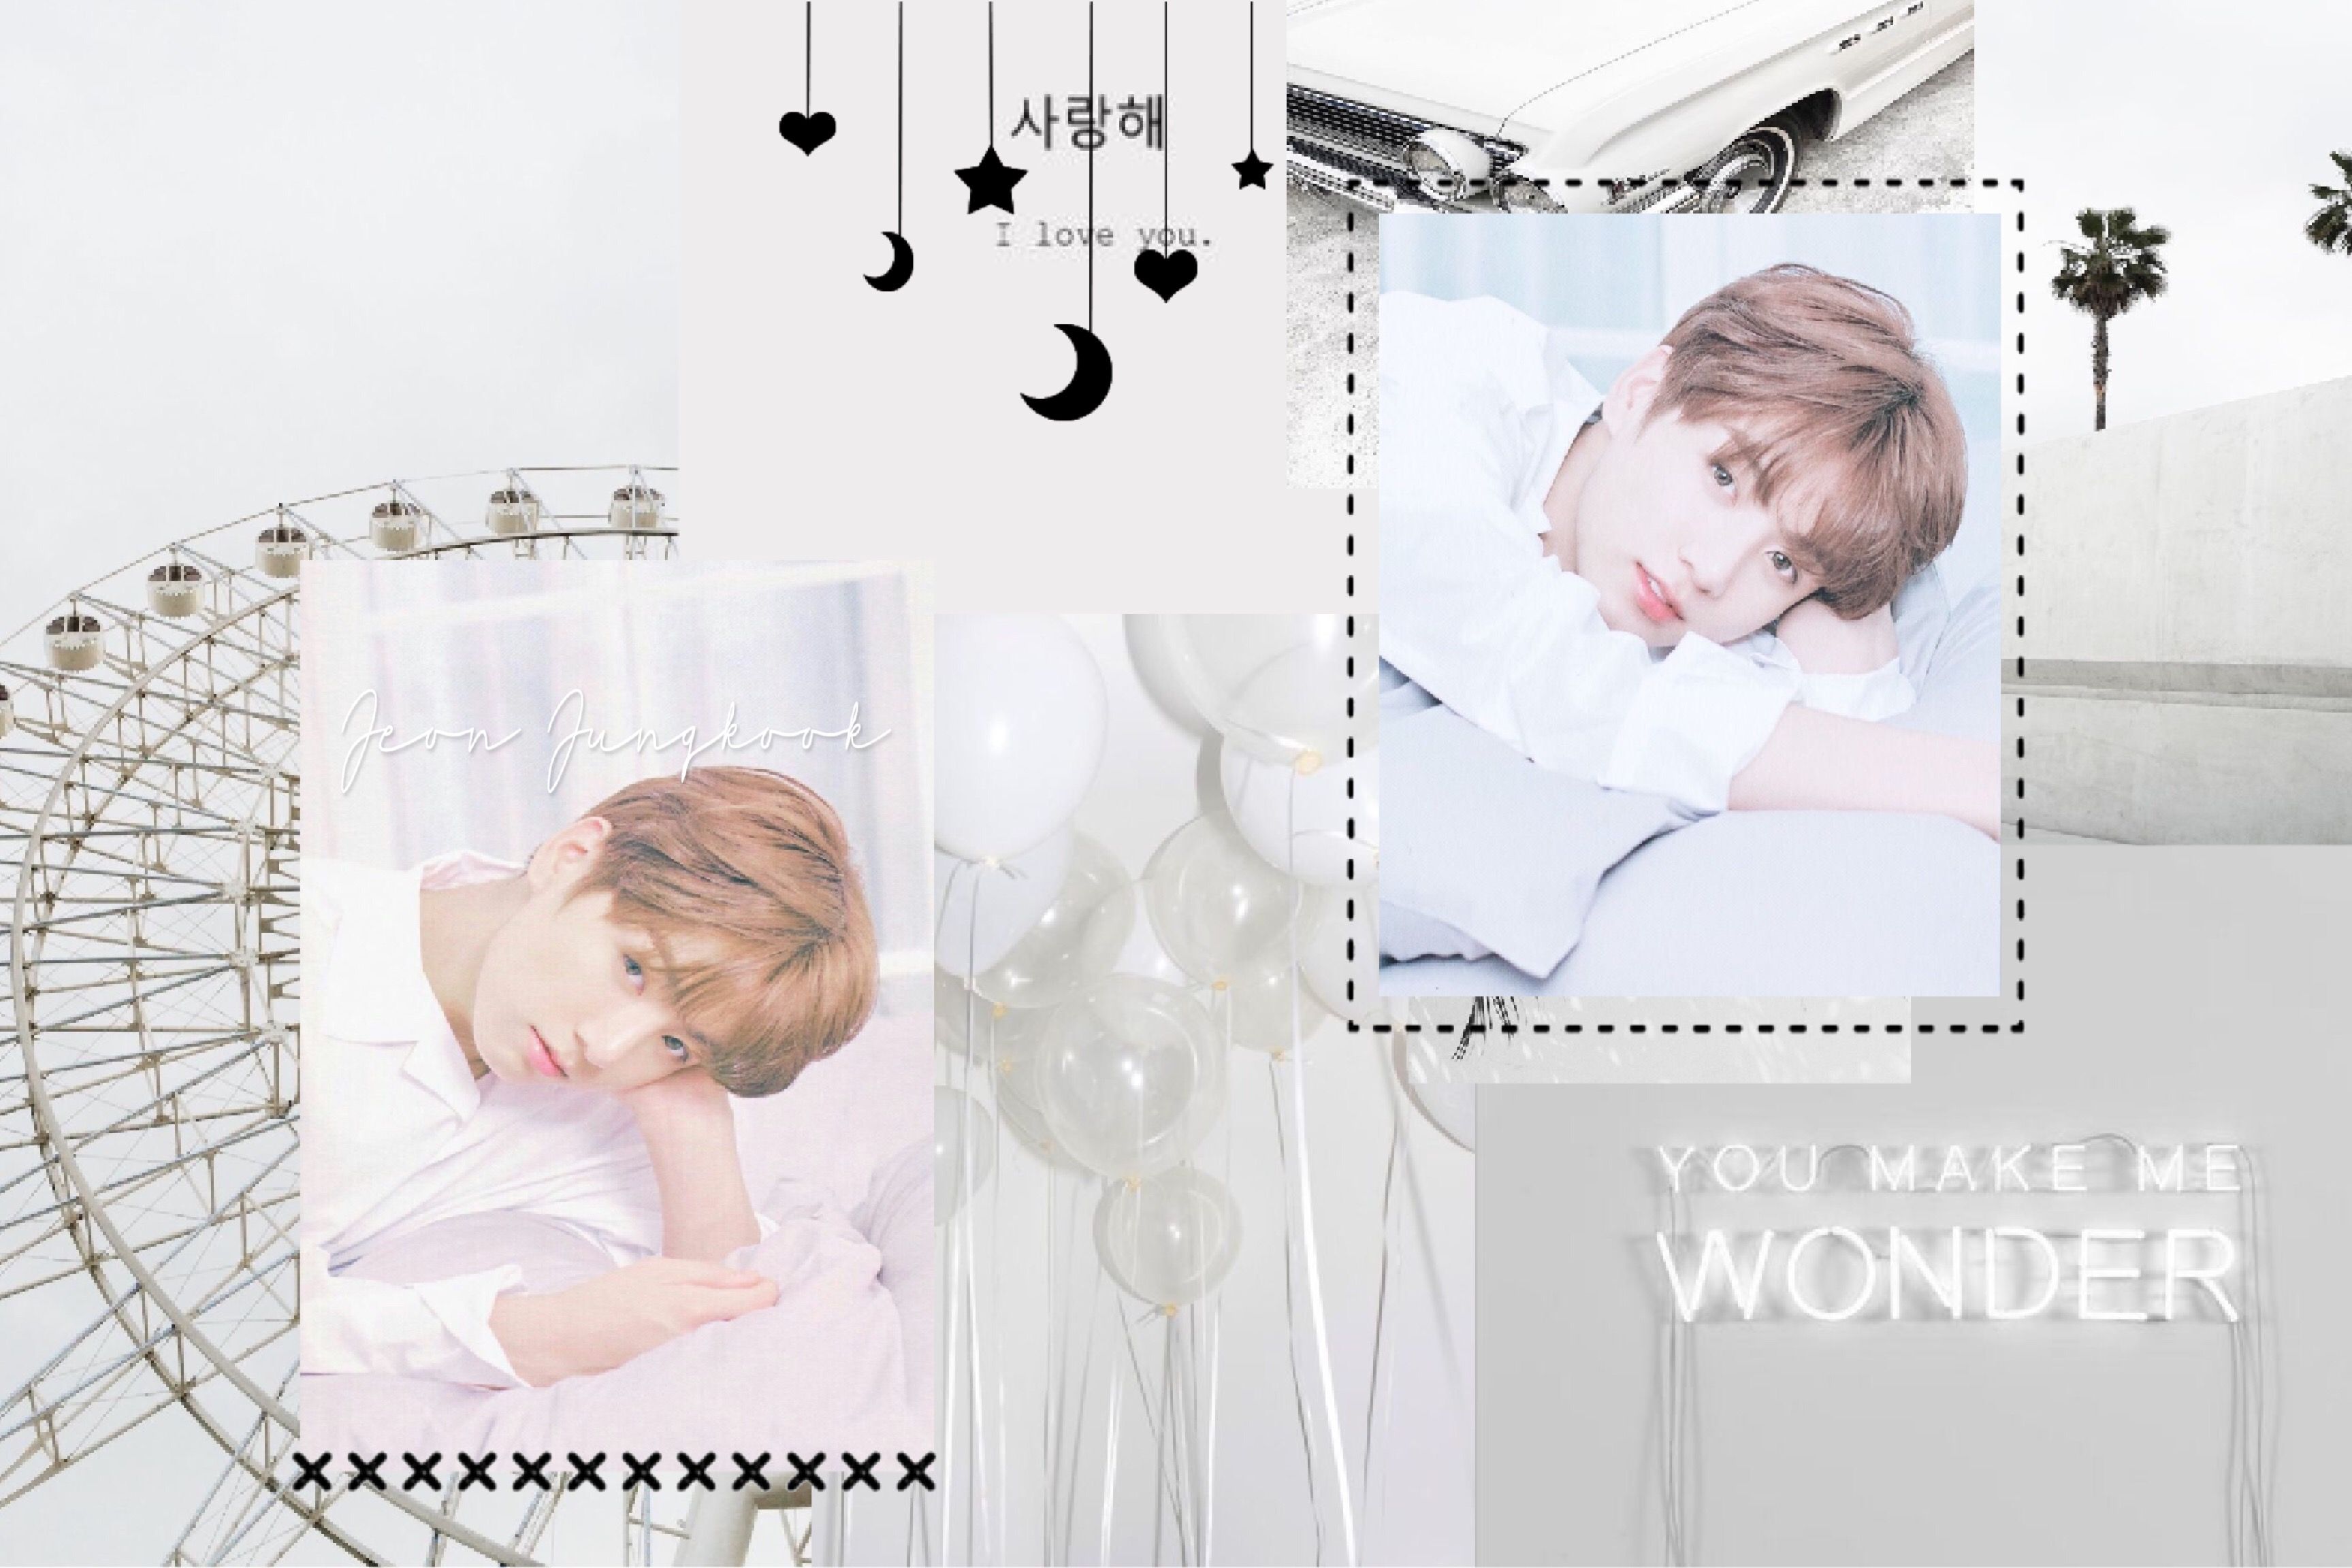 A collage of pictures with text and balloons - BTS, Jimin, Jungkook